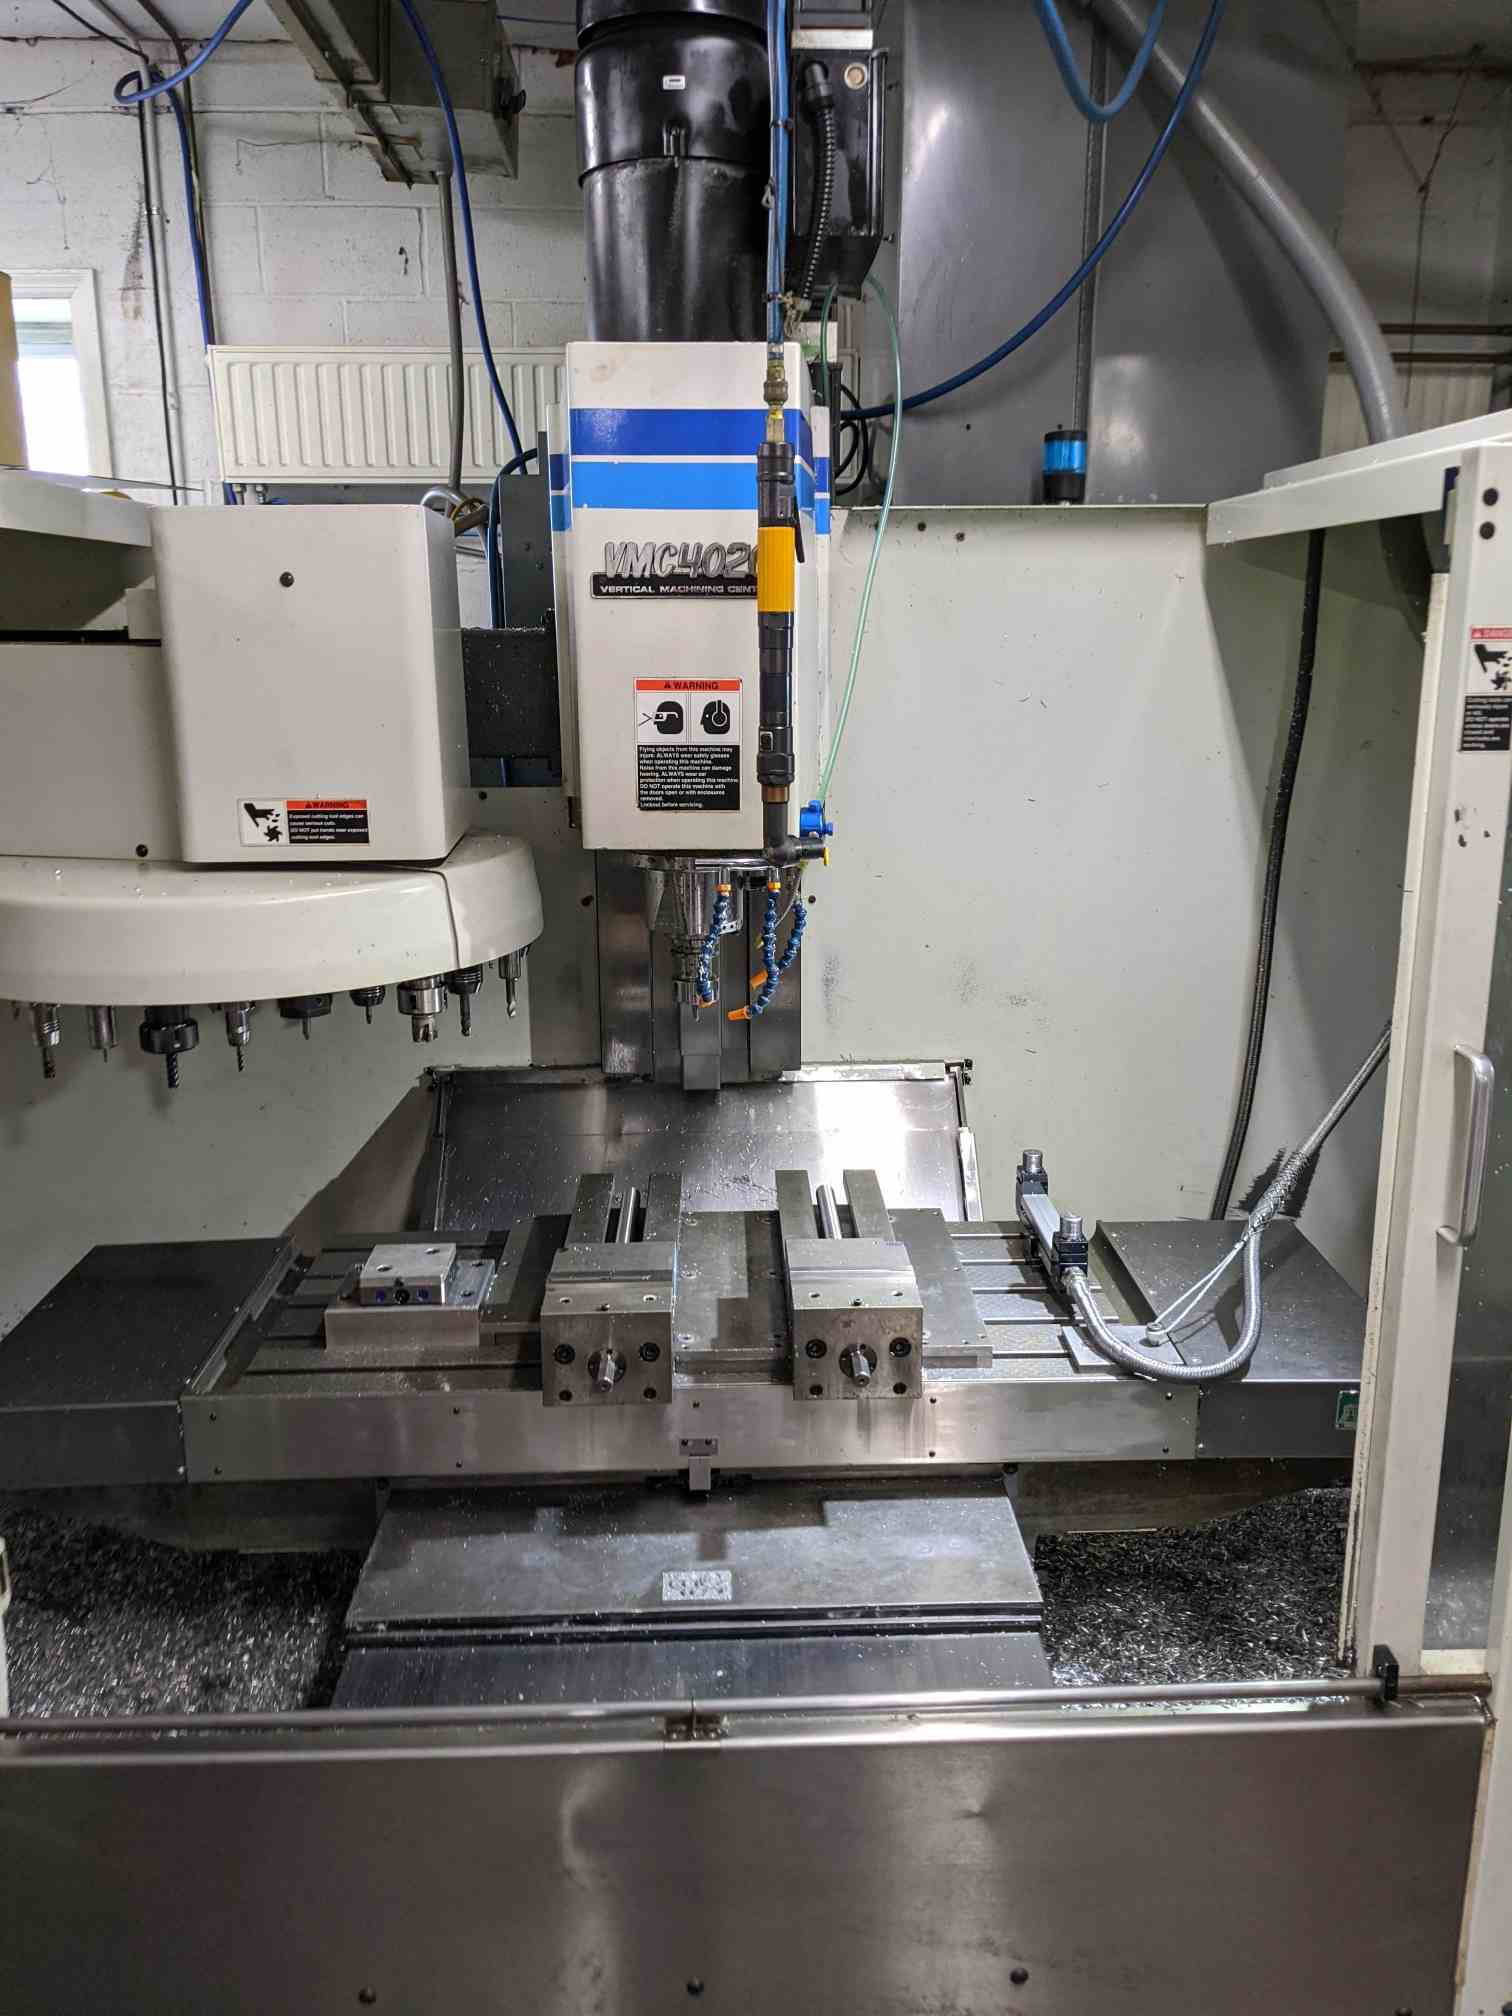 Fadal 4020 VMC, 1997 - 10k RPM Spindle, Upgraded Control, Renshaw Probe & Tool  Setter, Videos Available - Revelation Machinery